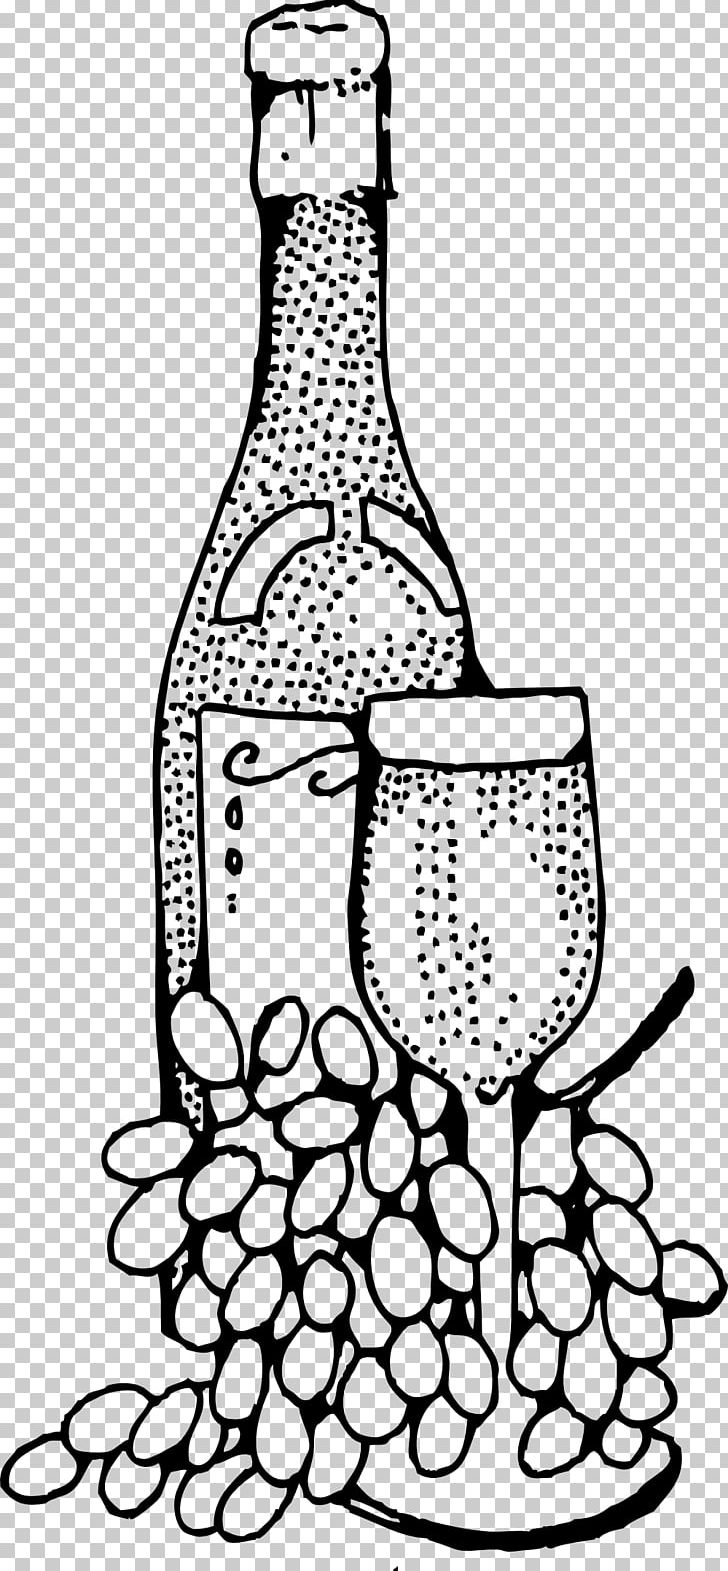 White Wine Bottle Ready-to-Use Food And Drink Spot Illustrations PNG, Clipart, Black And White, Bottle, Computer Icons, Drinkware, Food Free PNG Download